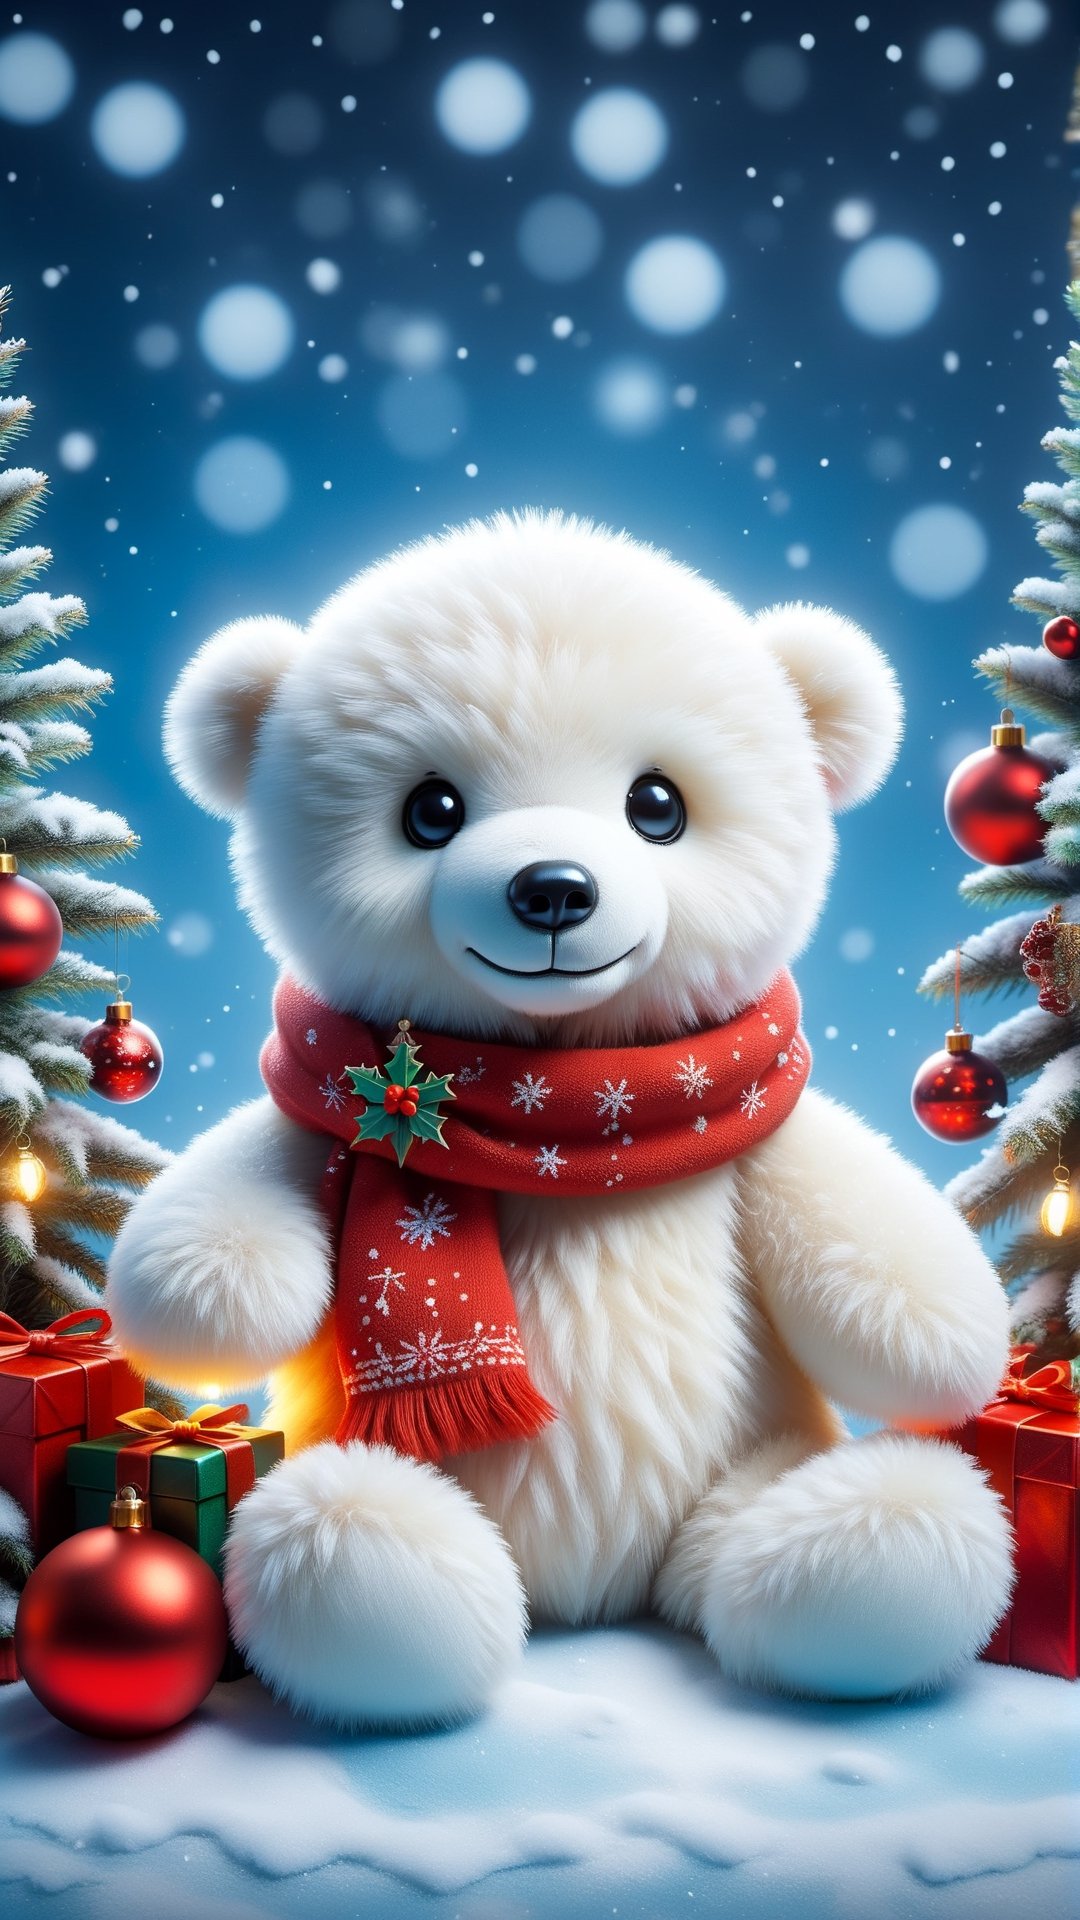 a white teddy bear sitting next to a christmas tree, an airbrush painting, by Dechko Uzunov, trending on reddit, 🎀 🧟 🍓 🧚, winter setting, avatar image, beautiful and cute, ( 3 1, cute and lovely, 2 0, winter, color picture, 3 1,ral-chrcrts,zhibi